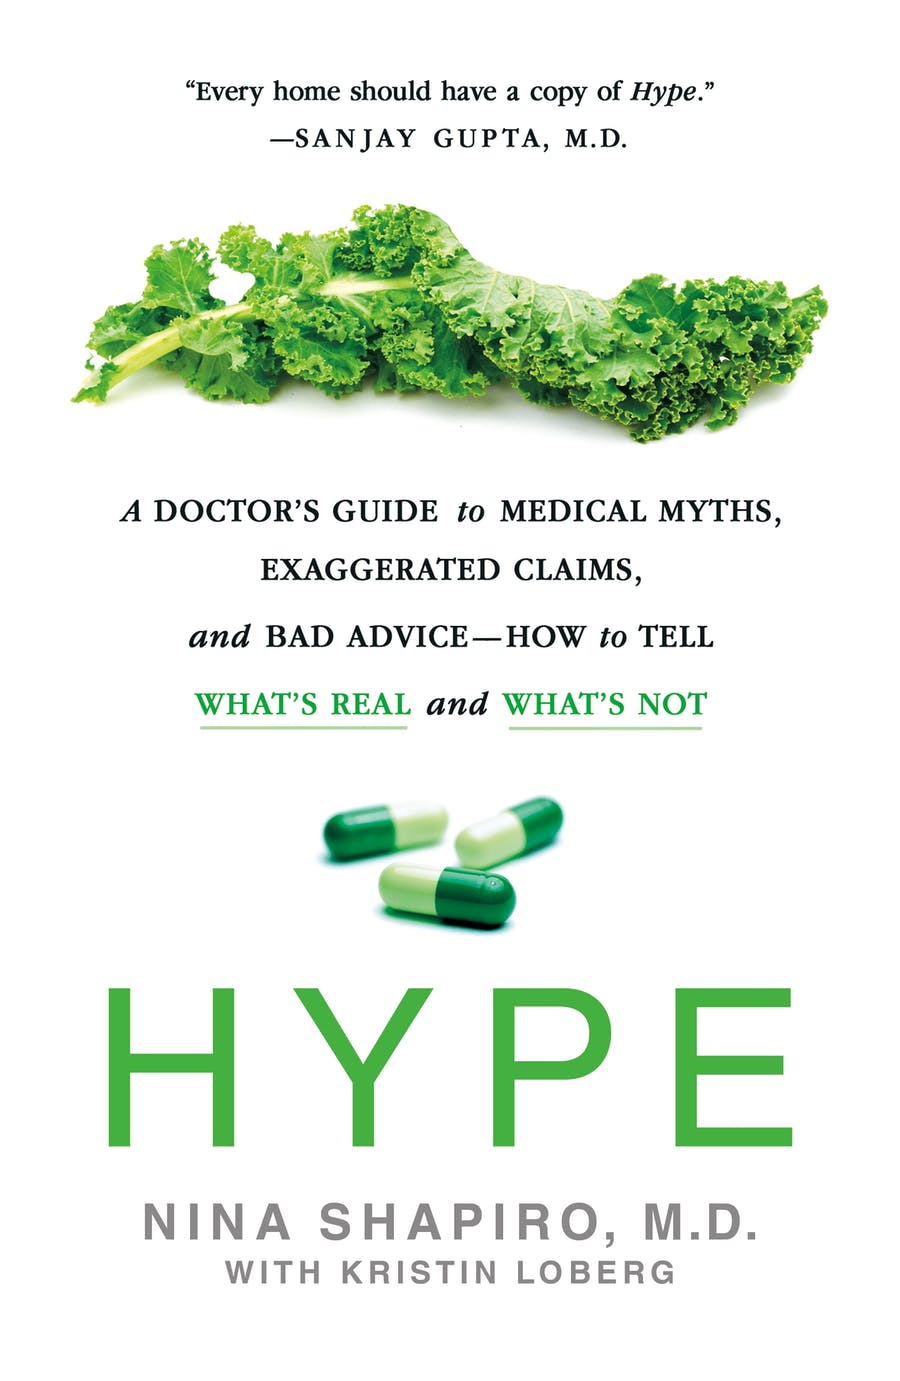 Book cover image of Hype by Nina Shapiro. Photo of green lettuce leaf and green prescription tablets